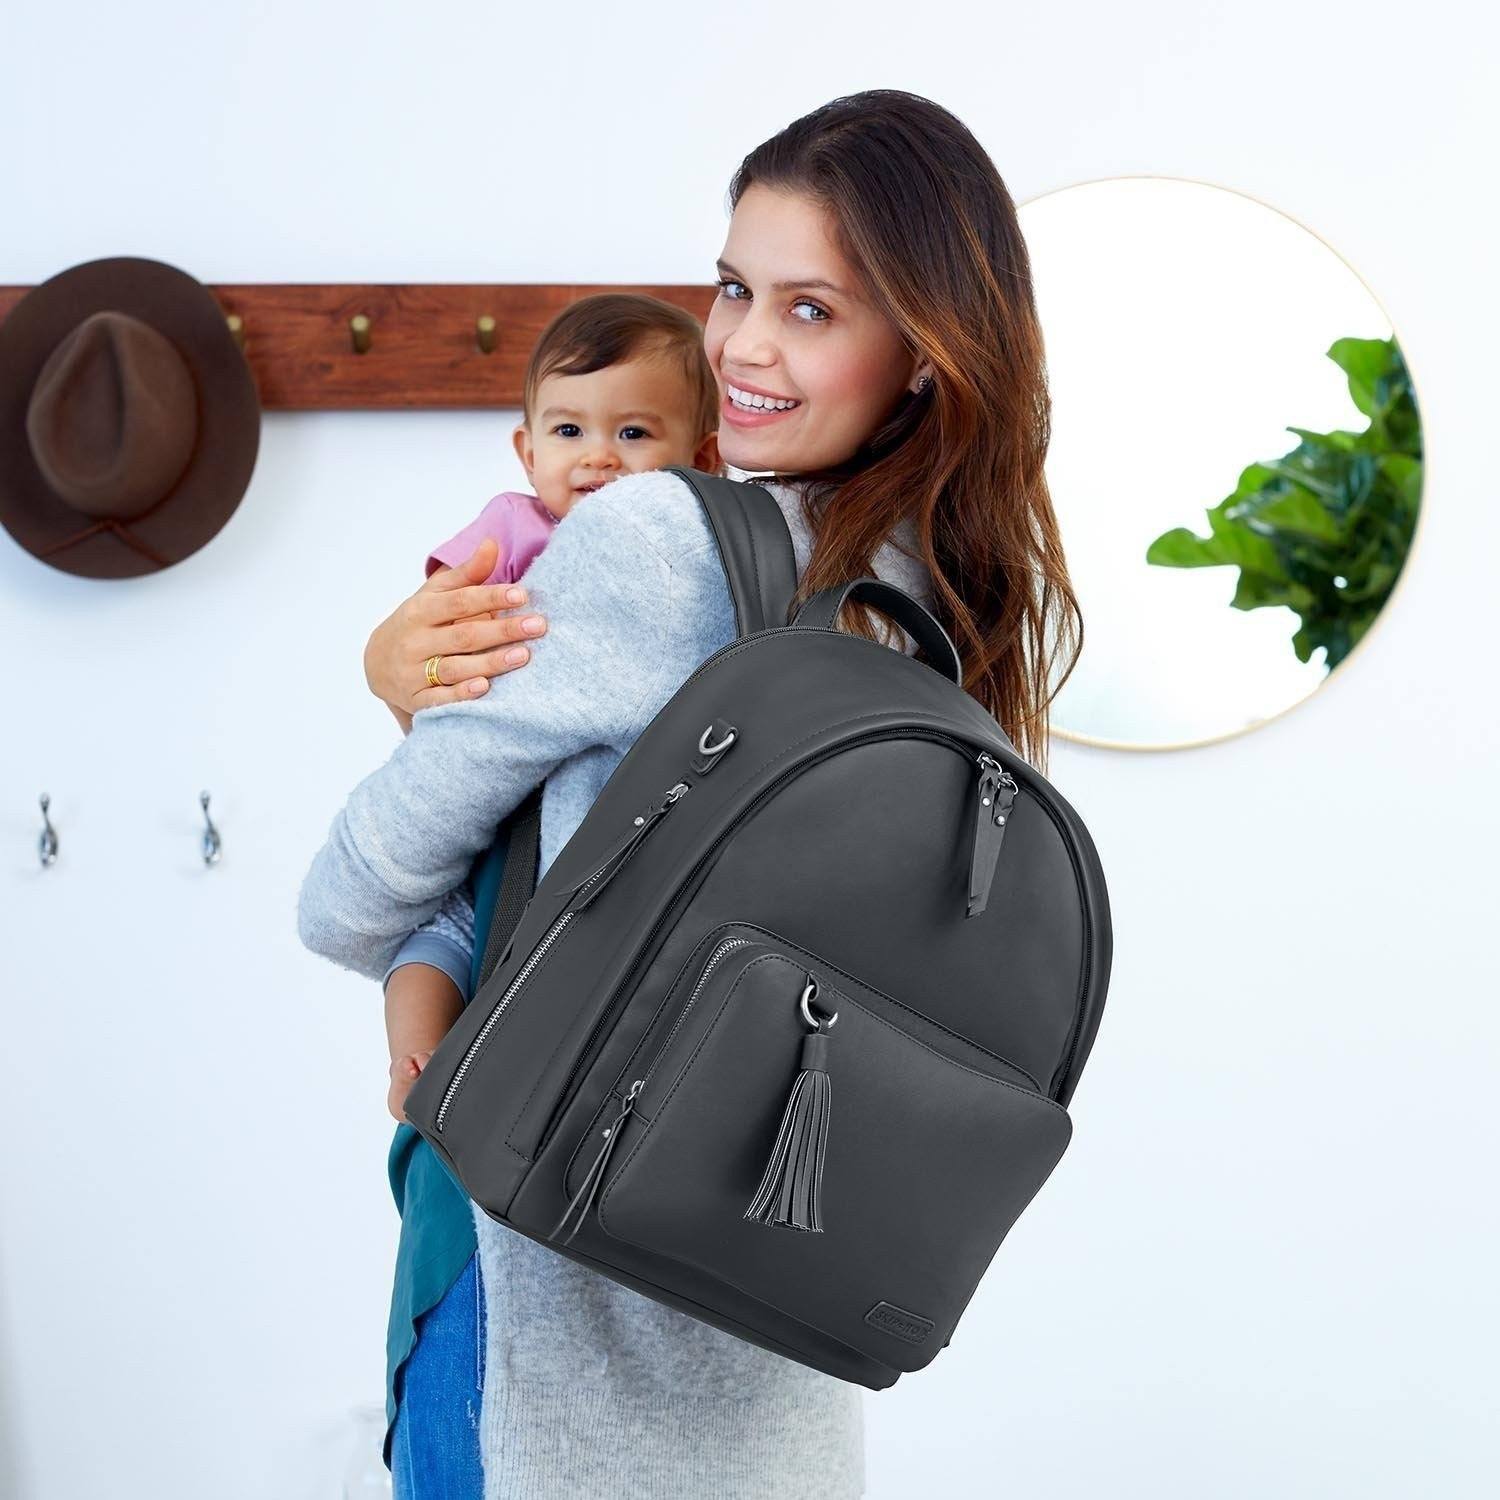 Skip Hop Mochila GREENWICH Simply Chic Anne Claire Baby Store 